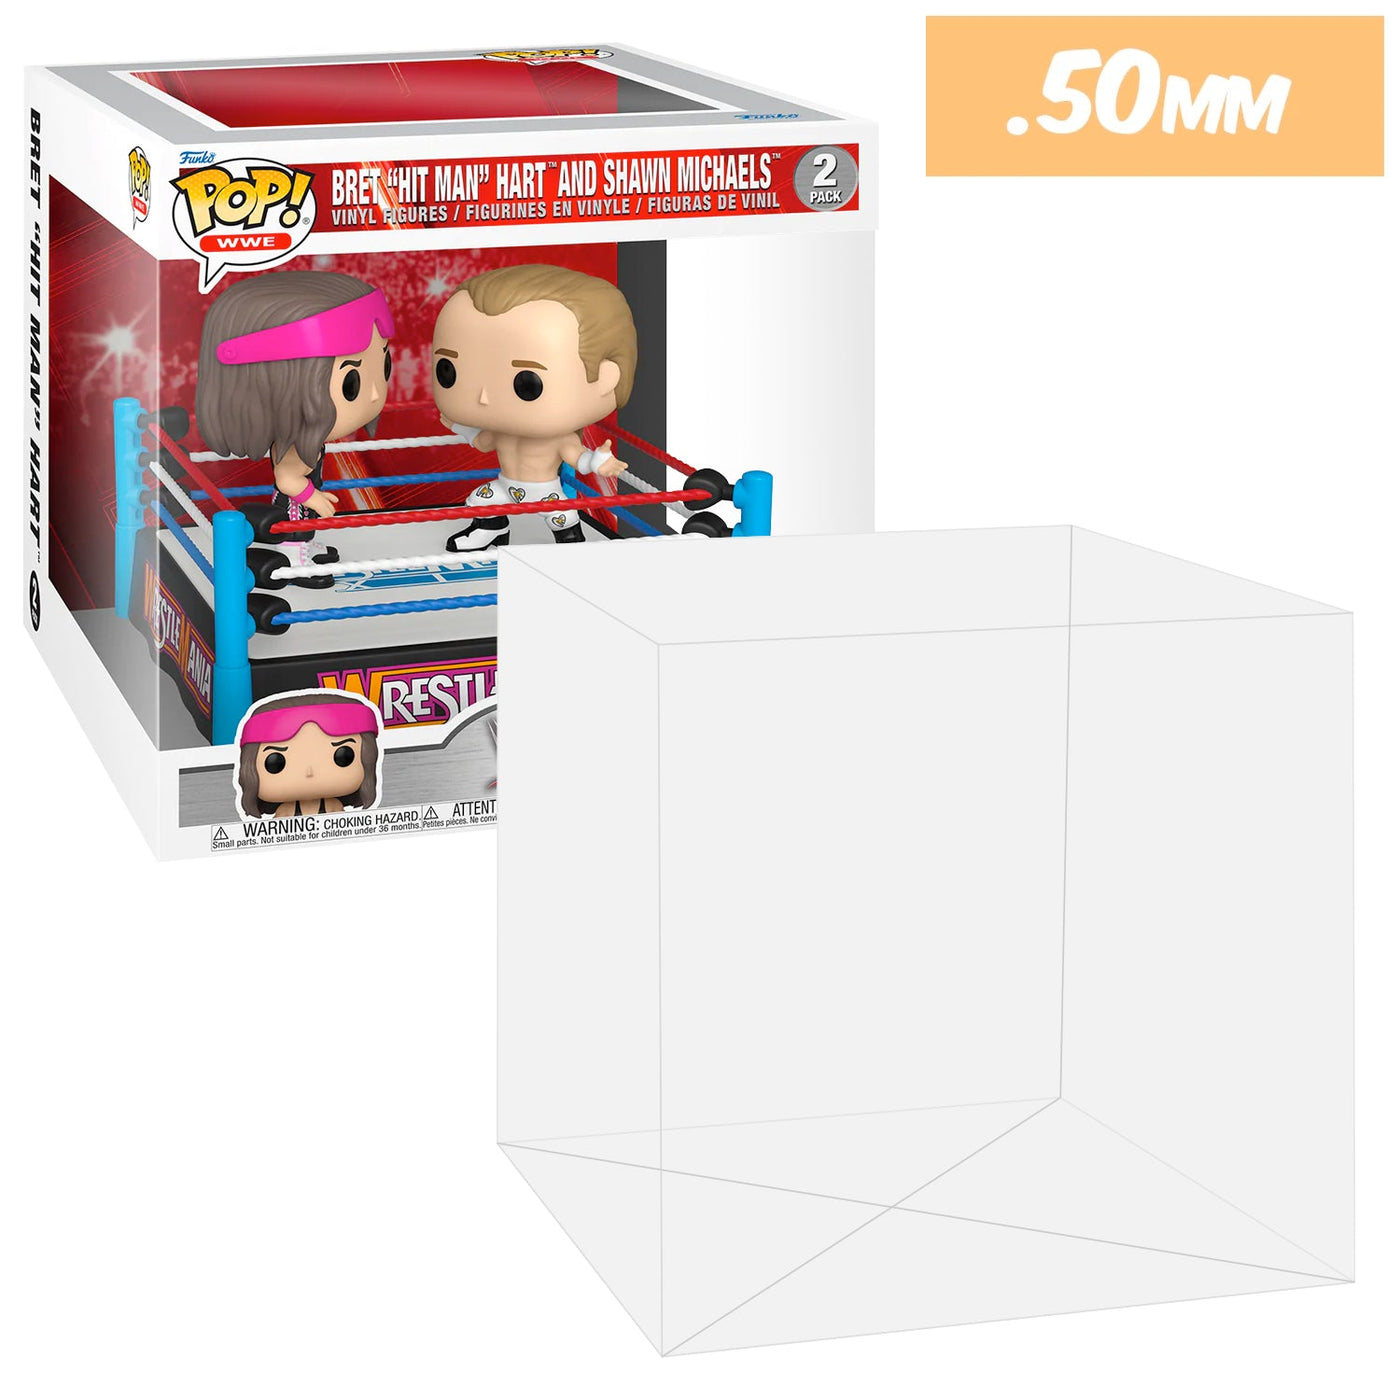 Funko POP! 2 Pack WWE Bret Hit Man Hart and Shawn Michaels Pop Protector Size CONFIRMED by Display Geek